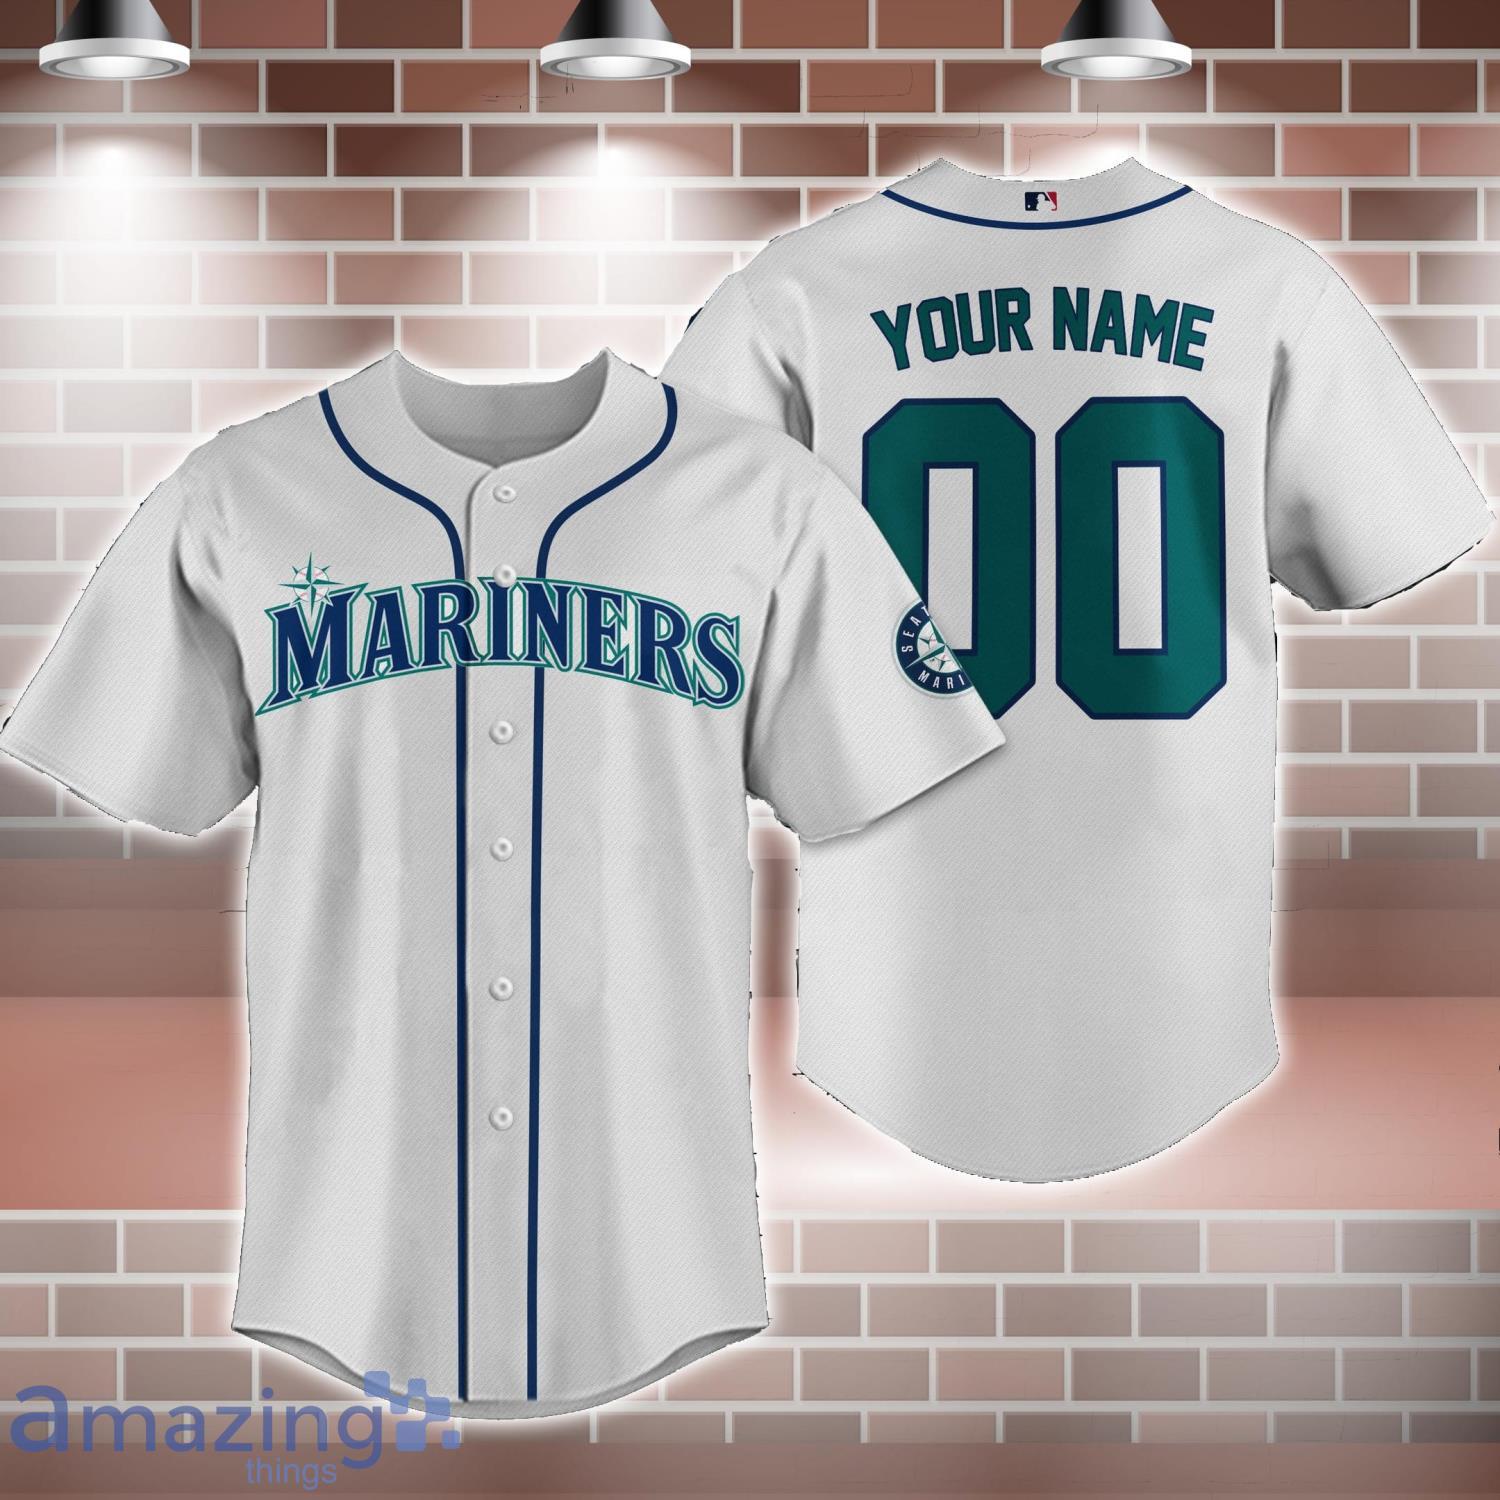 Seattle Mariners MLB Custom Number And Name 3D Hoodie For Men And